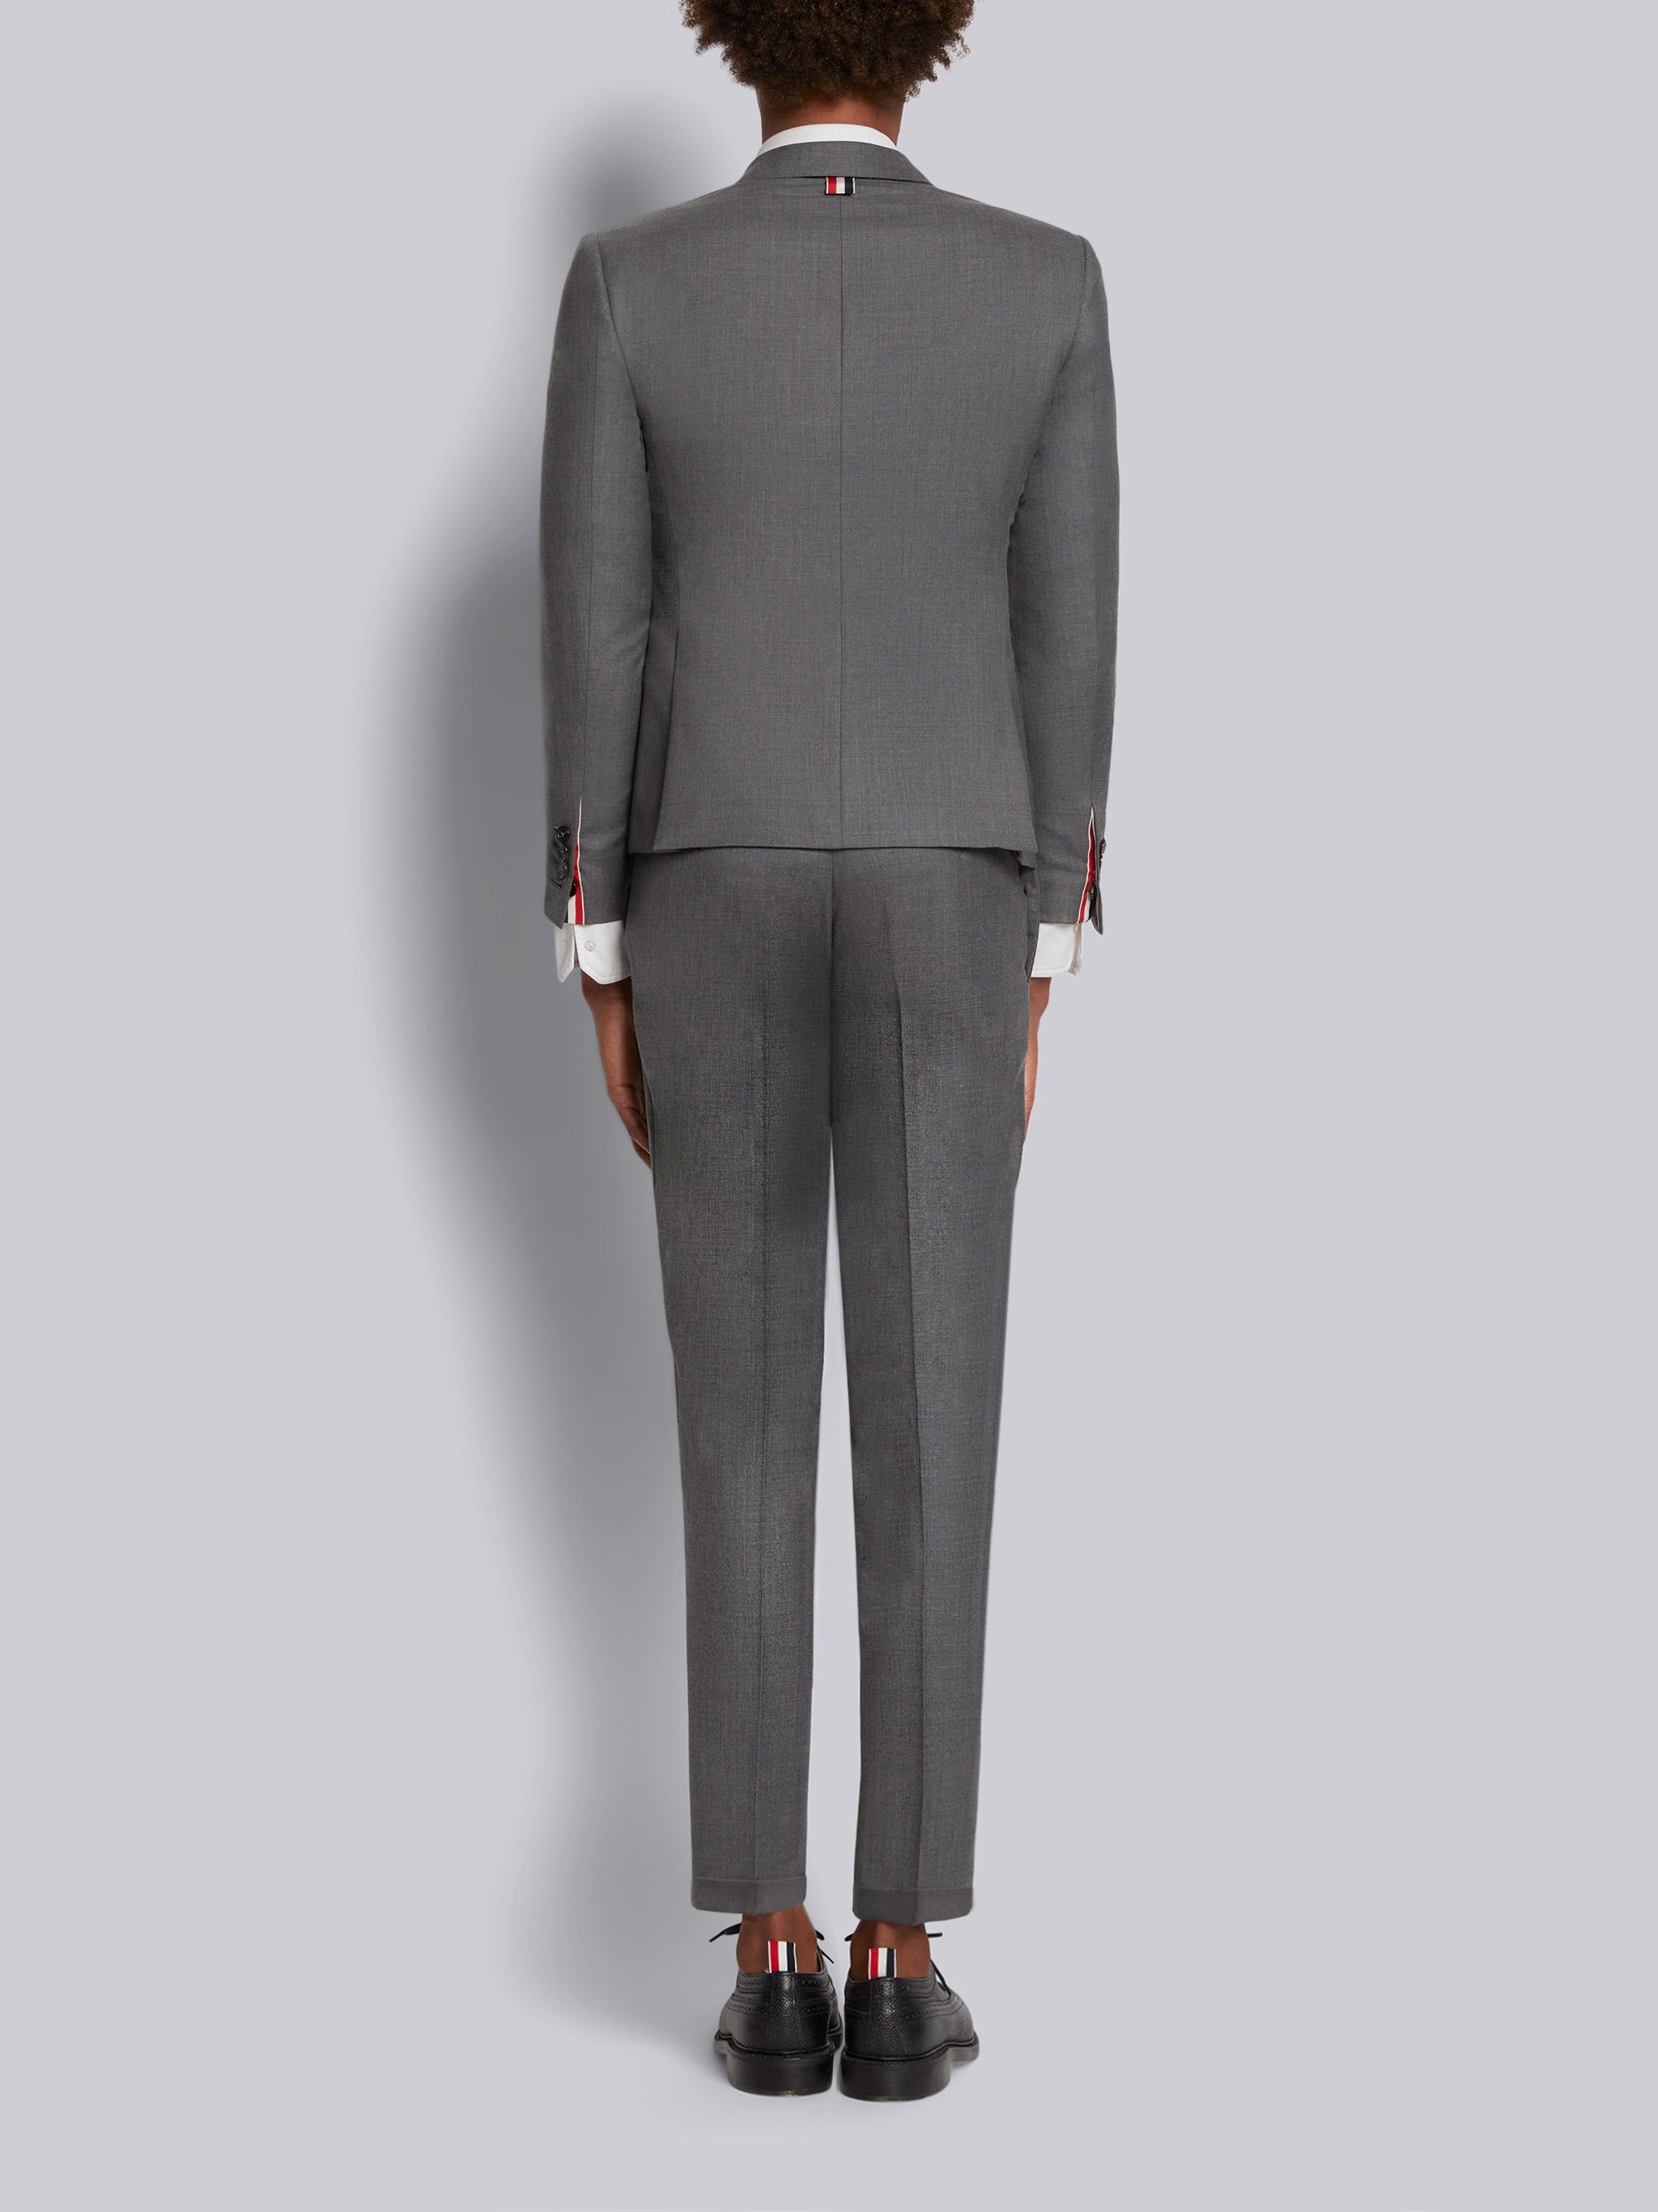 Medium Grey Super 120s Twill High Armhole Suit With Tie And Low Rise Skinny Trouser - 3